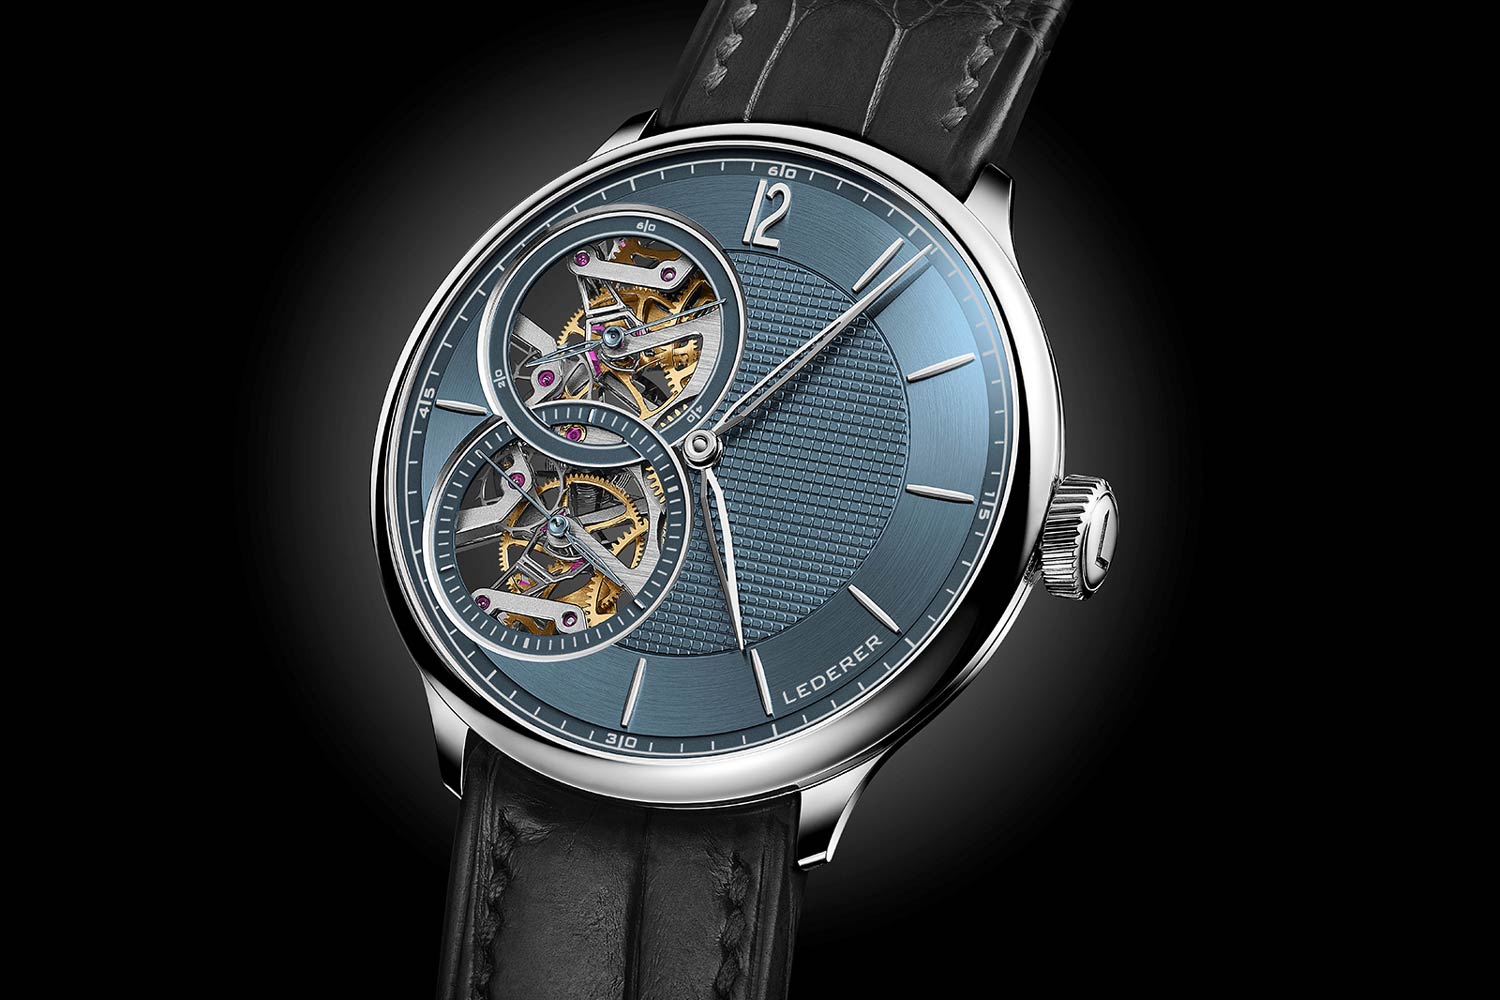 The dial features an engine-turned middle with a concentrically brushed chapter ring